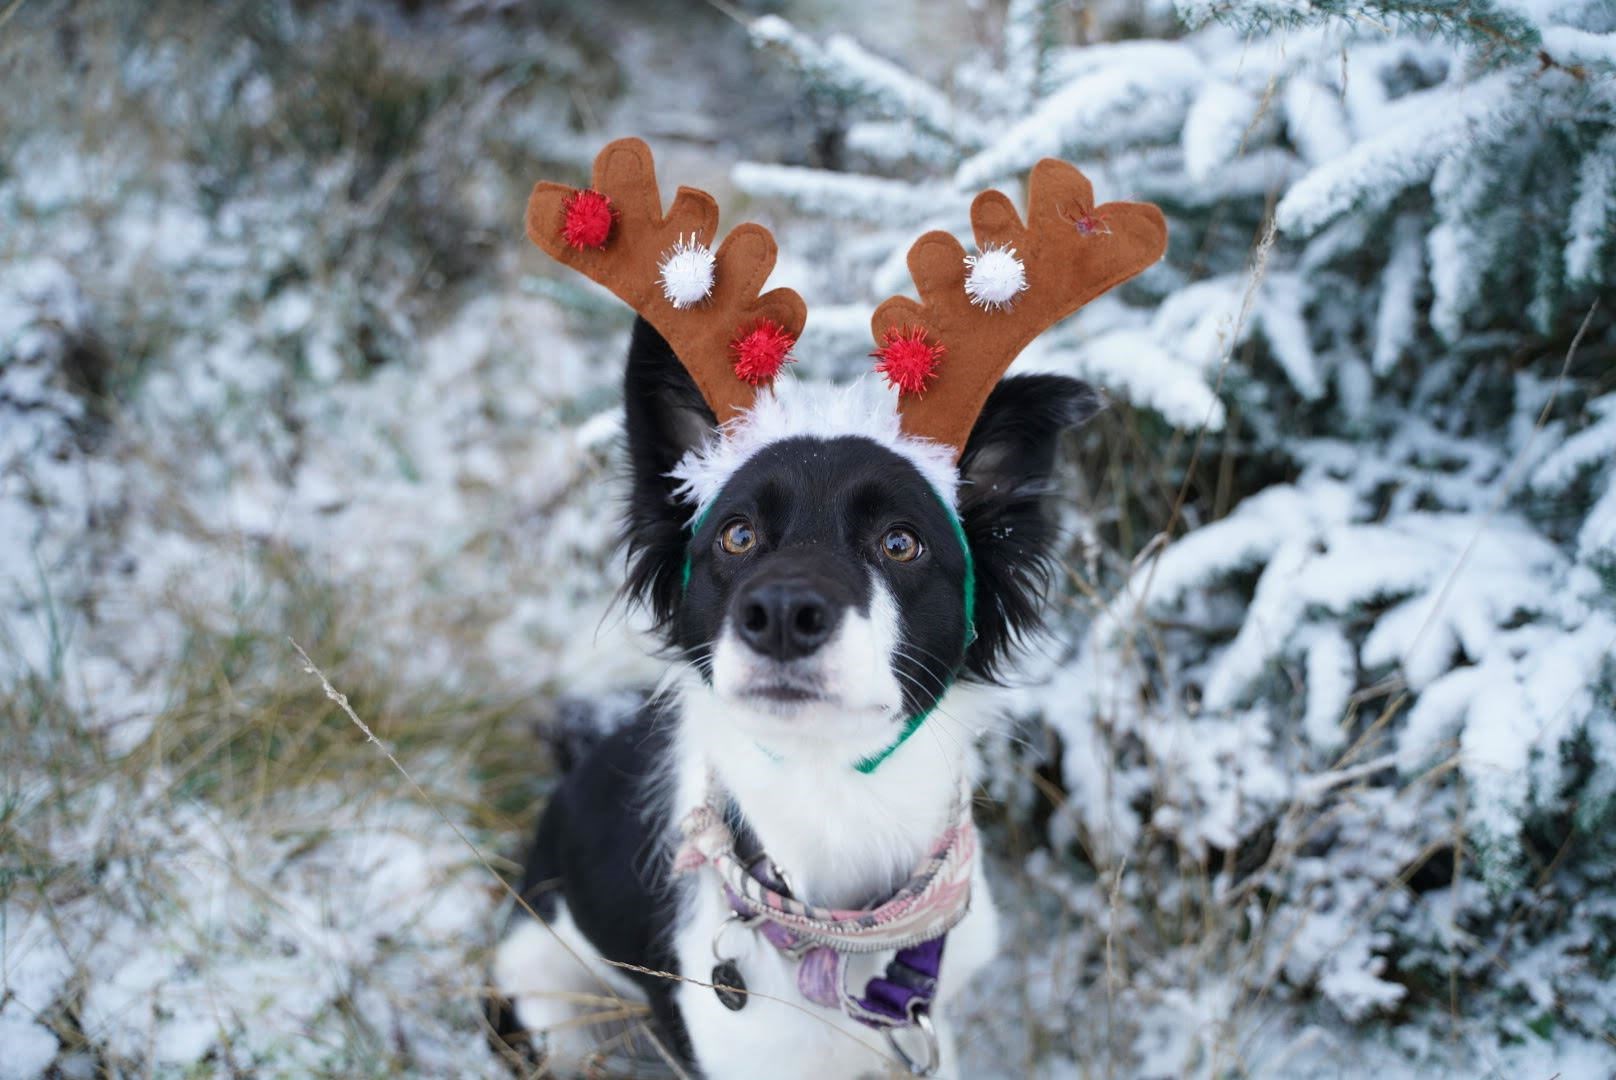 Reader Tsara Cole took these photos of dogs in the Highlands.